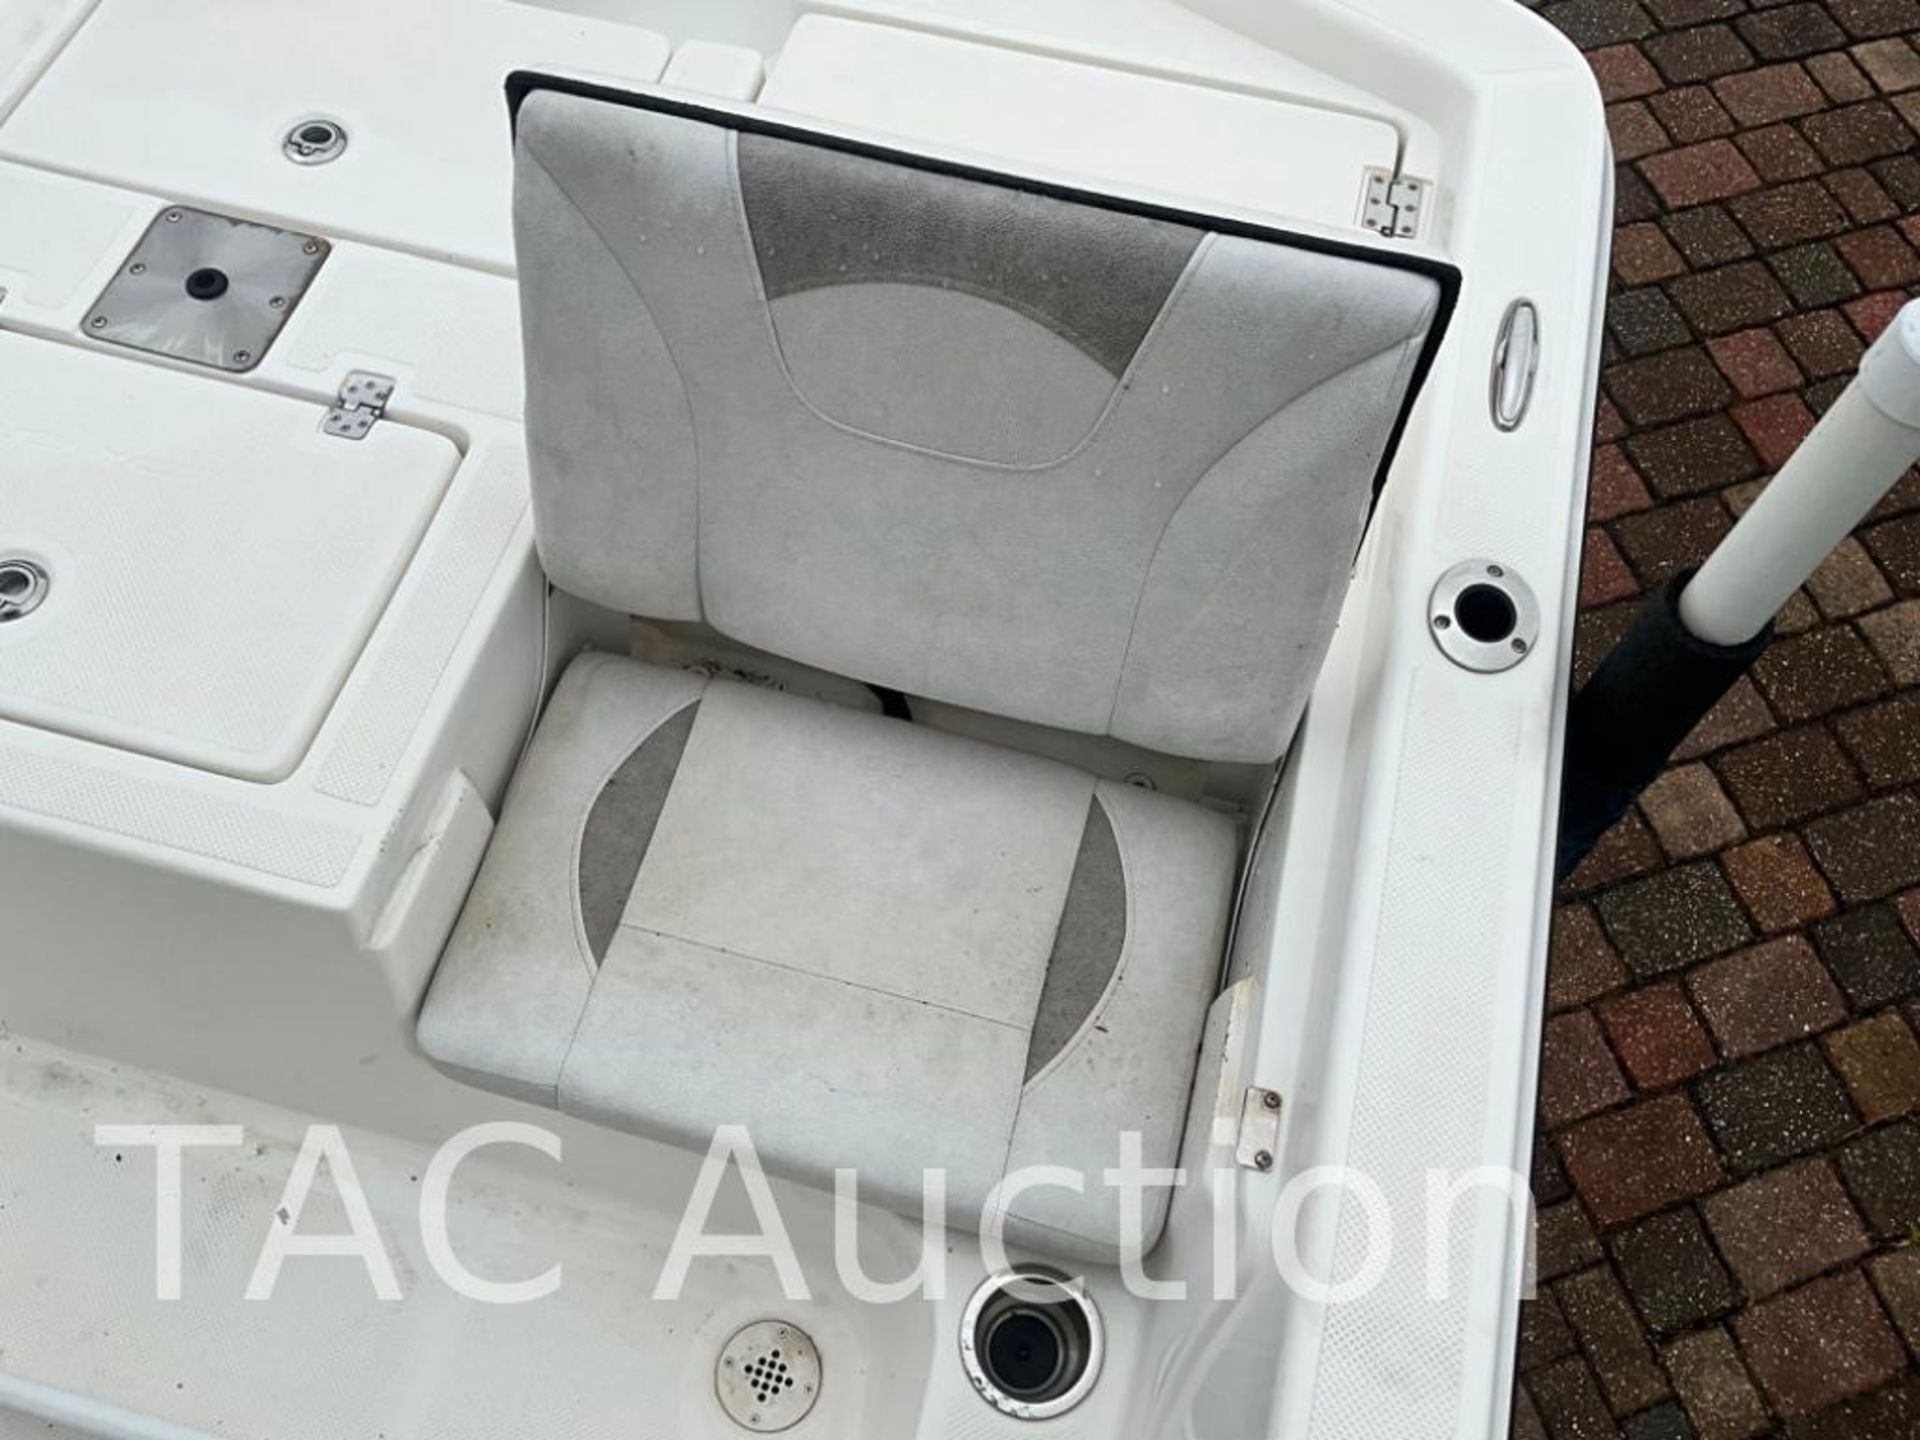 2019 Epic 24ft Bay Center Console - Image 15 of 48